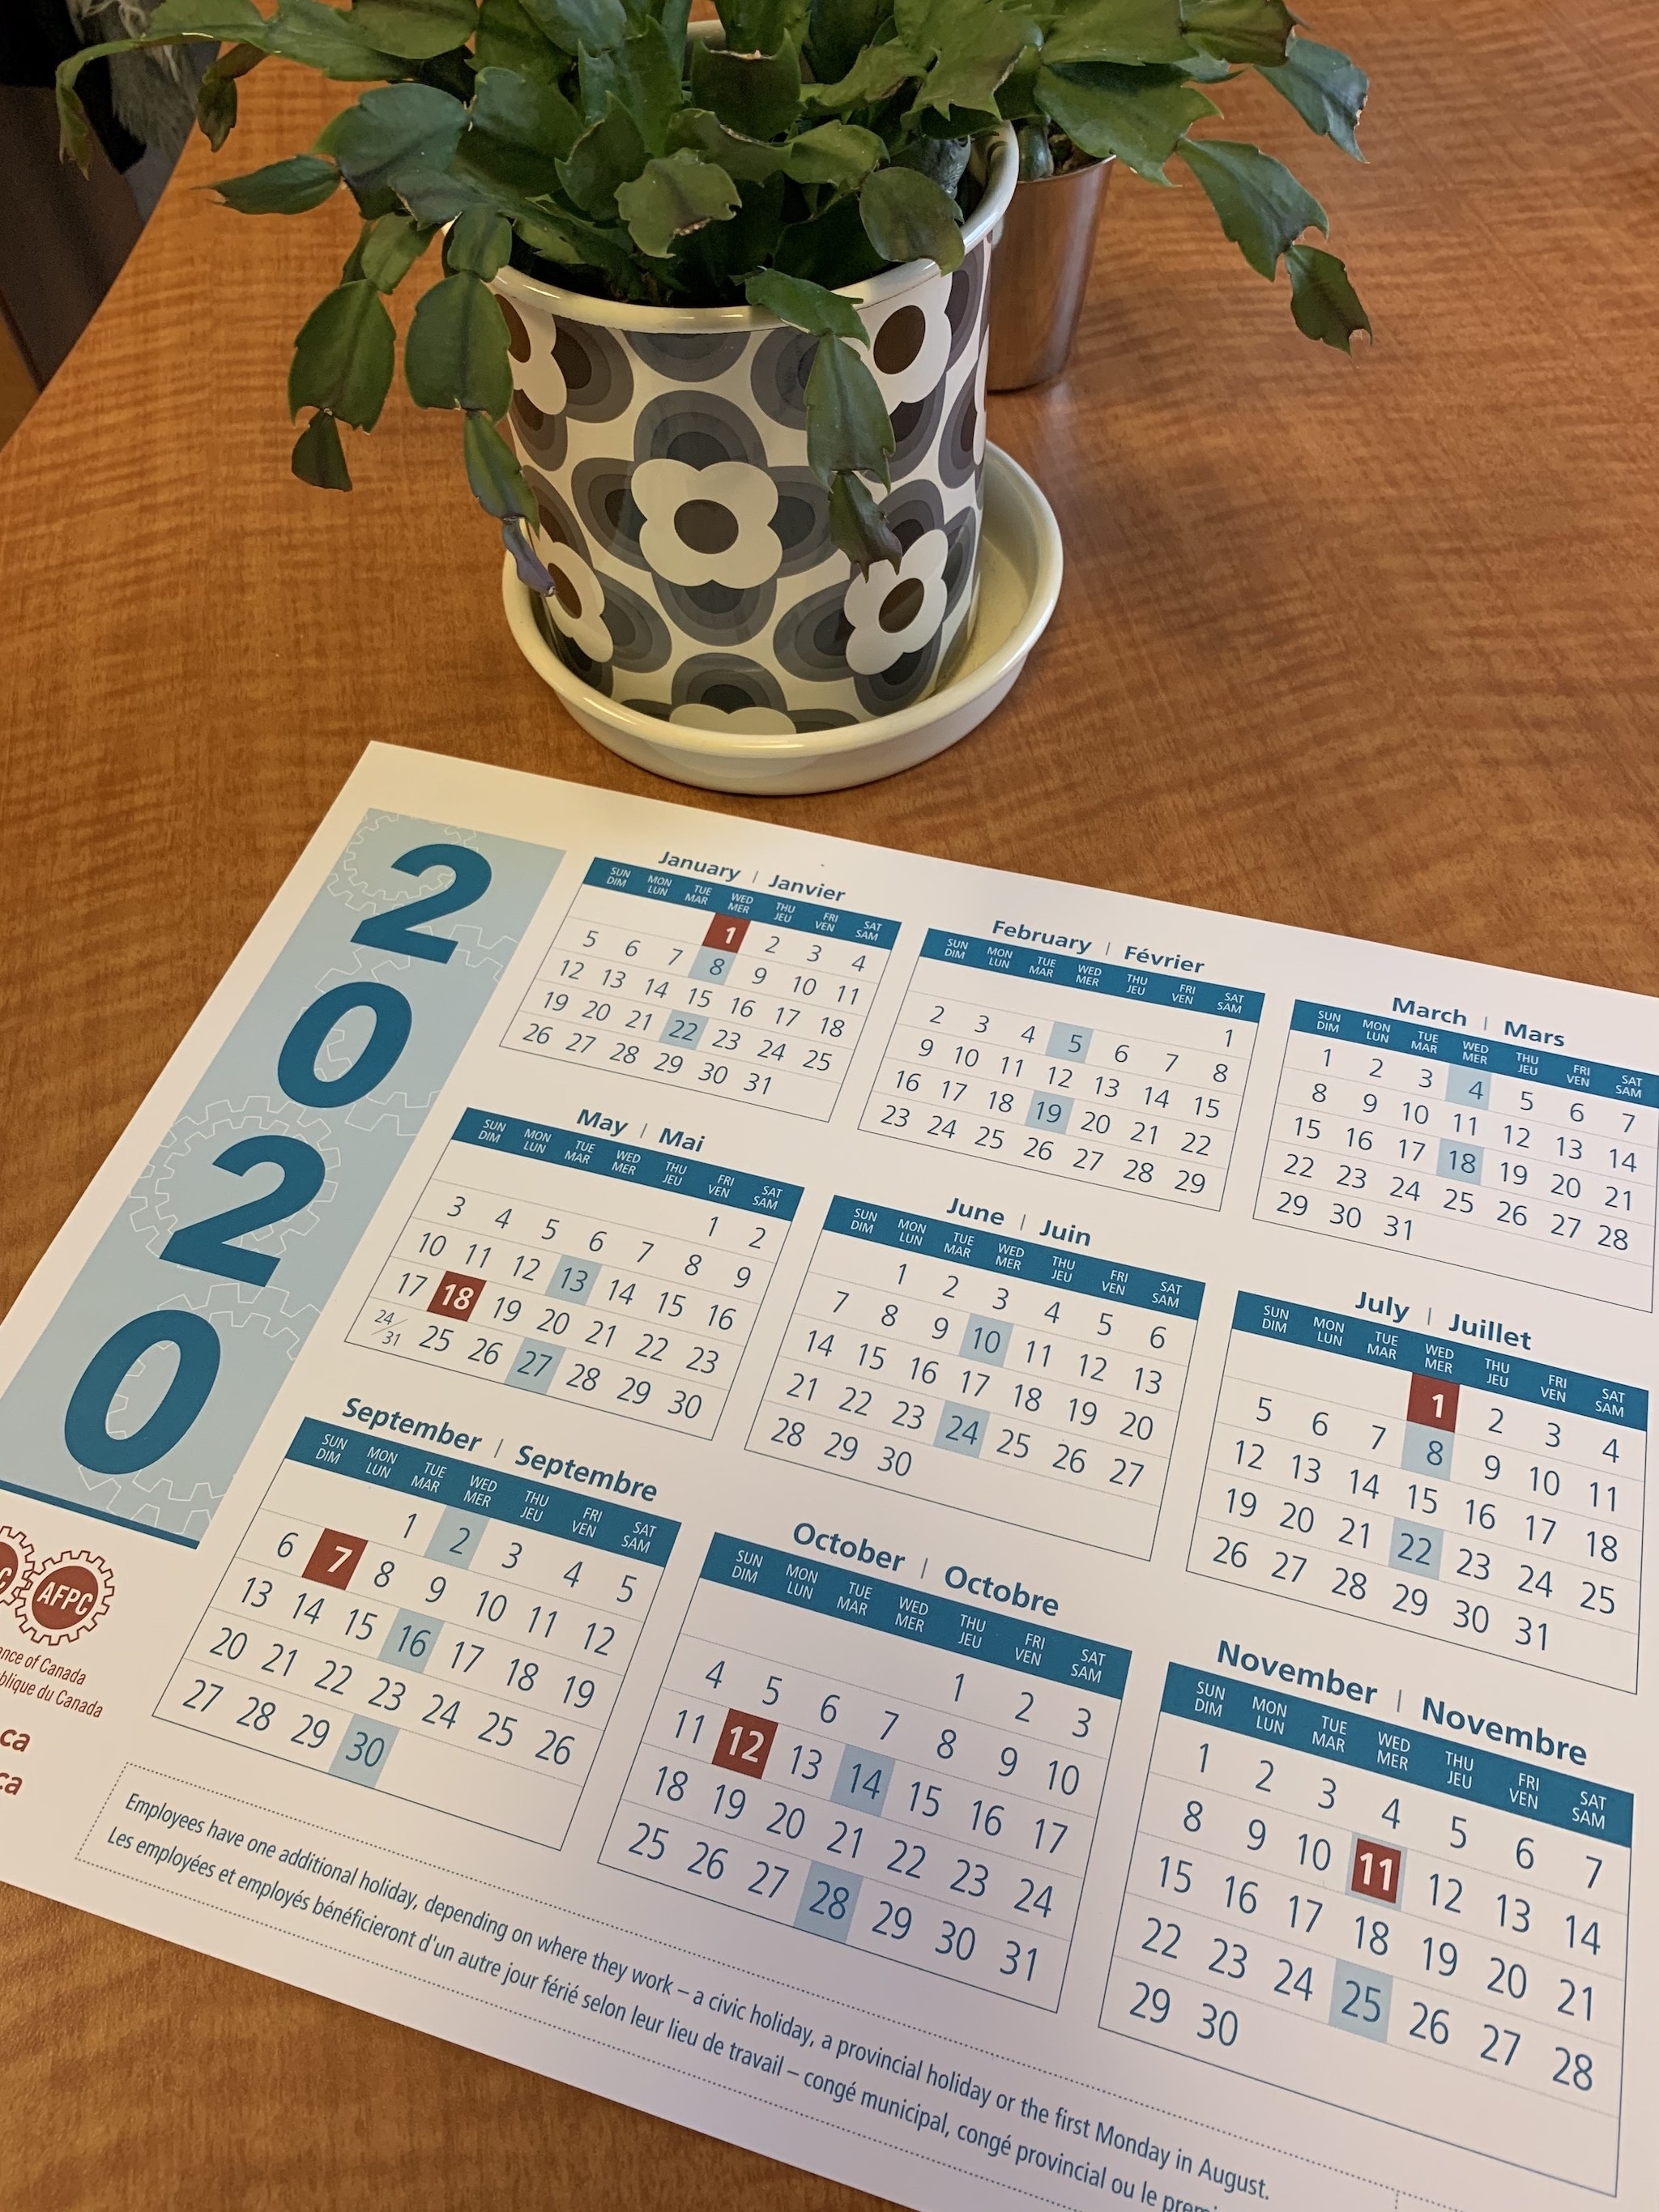 Psac Calendars | Public Service Alliance Of Canada Sick Day Calendar For Employees 2021